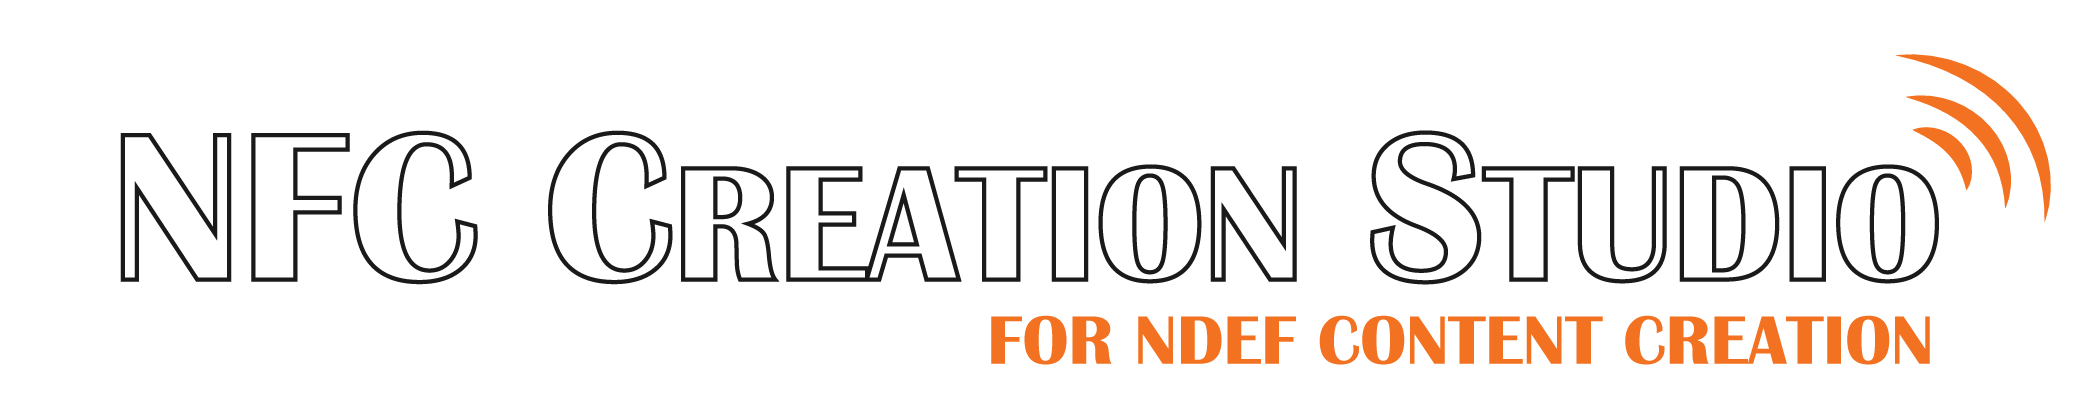 NFC Creation Studio for NDEF content creation